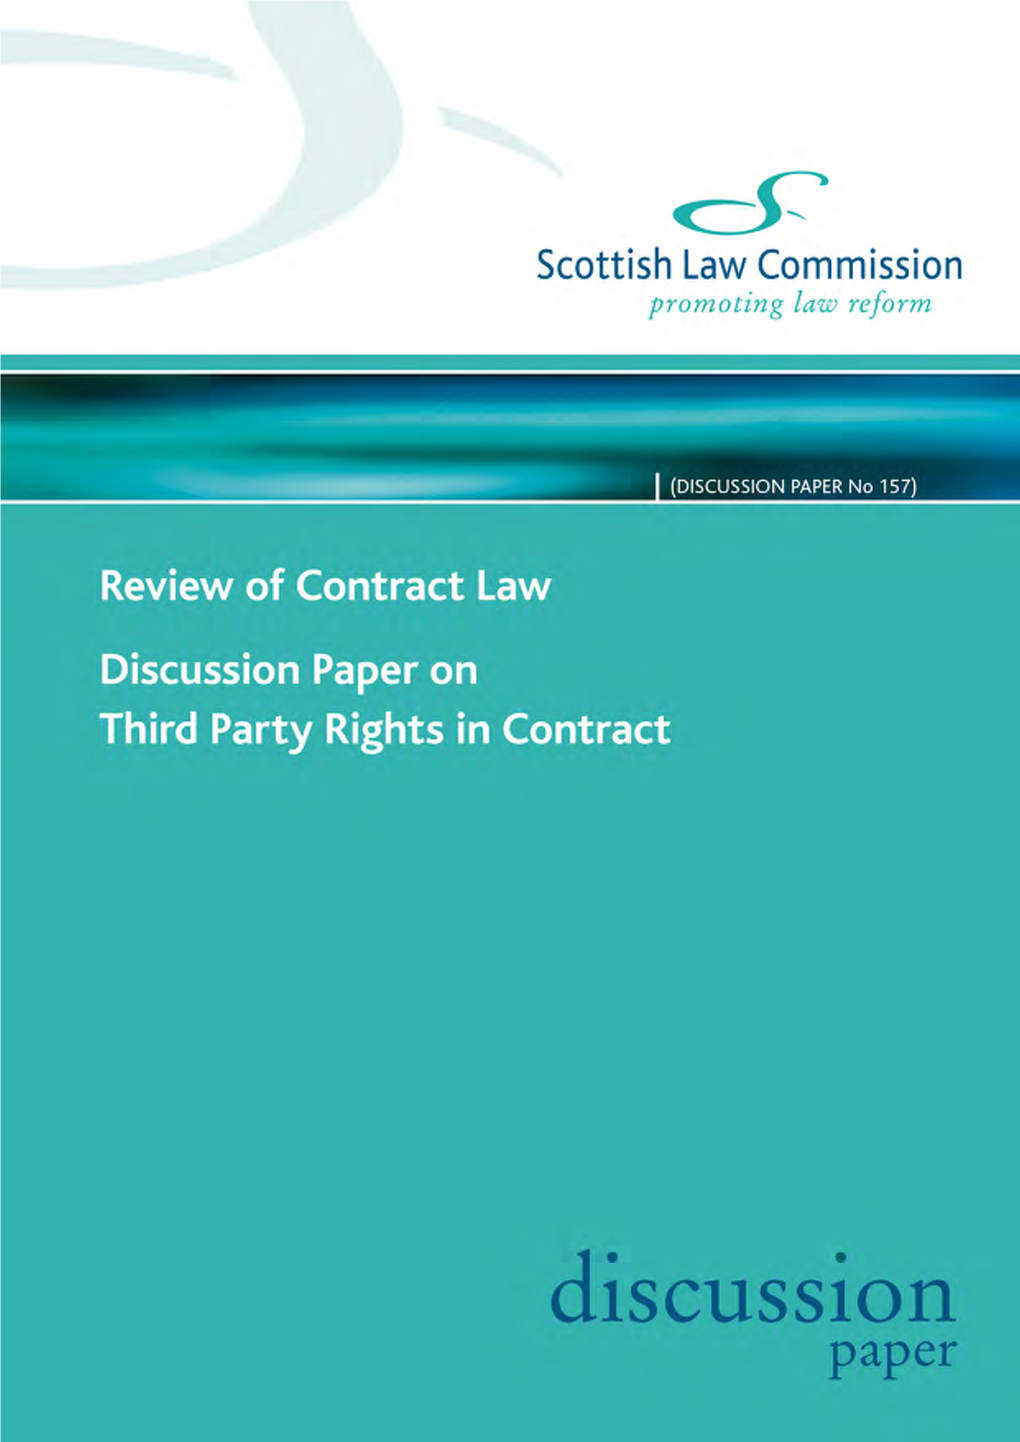 Discussion Paper on Third Party Rights in Contract